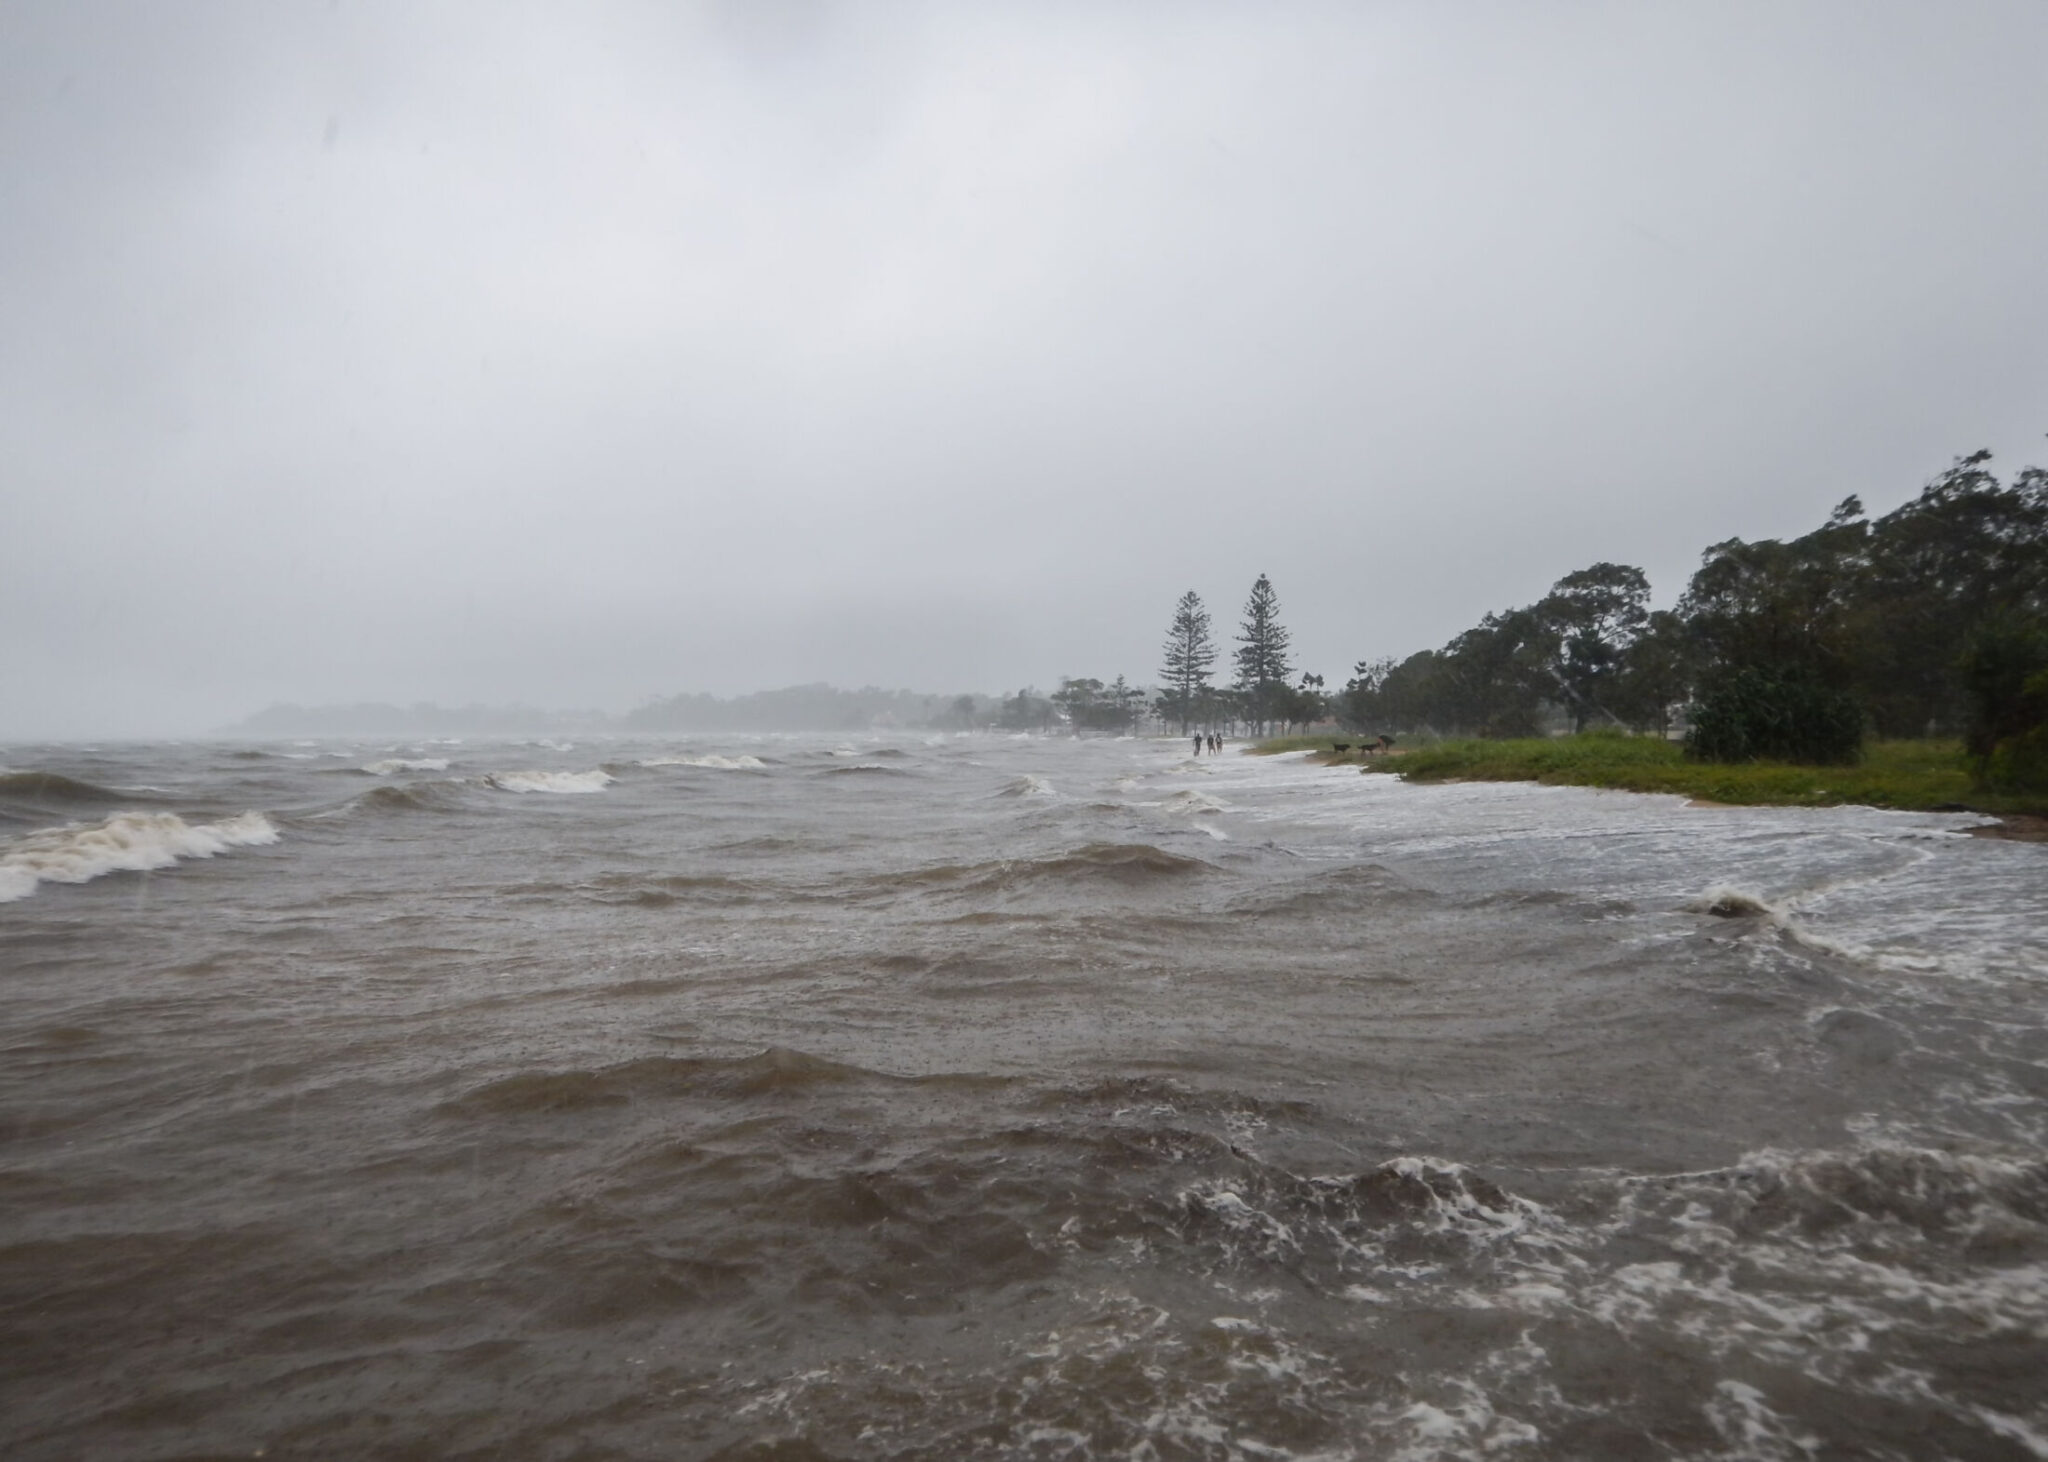 Storm surge tide at Sandgate in Brisbane after Cyclone Marcia.